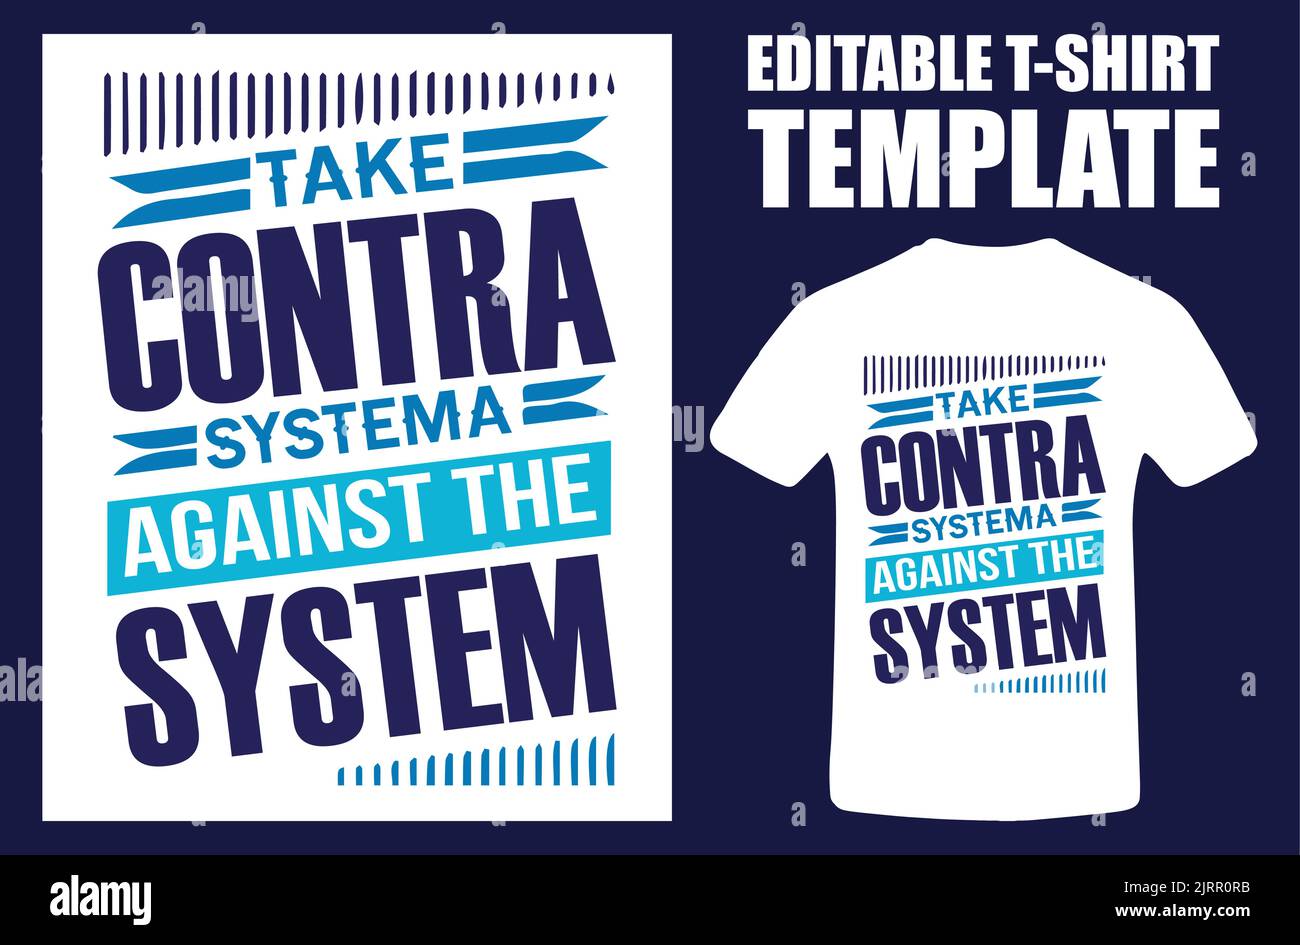 A creative design of 'Take contra systema against the system' on a white background for T-shirts Stock Vector